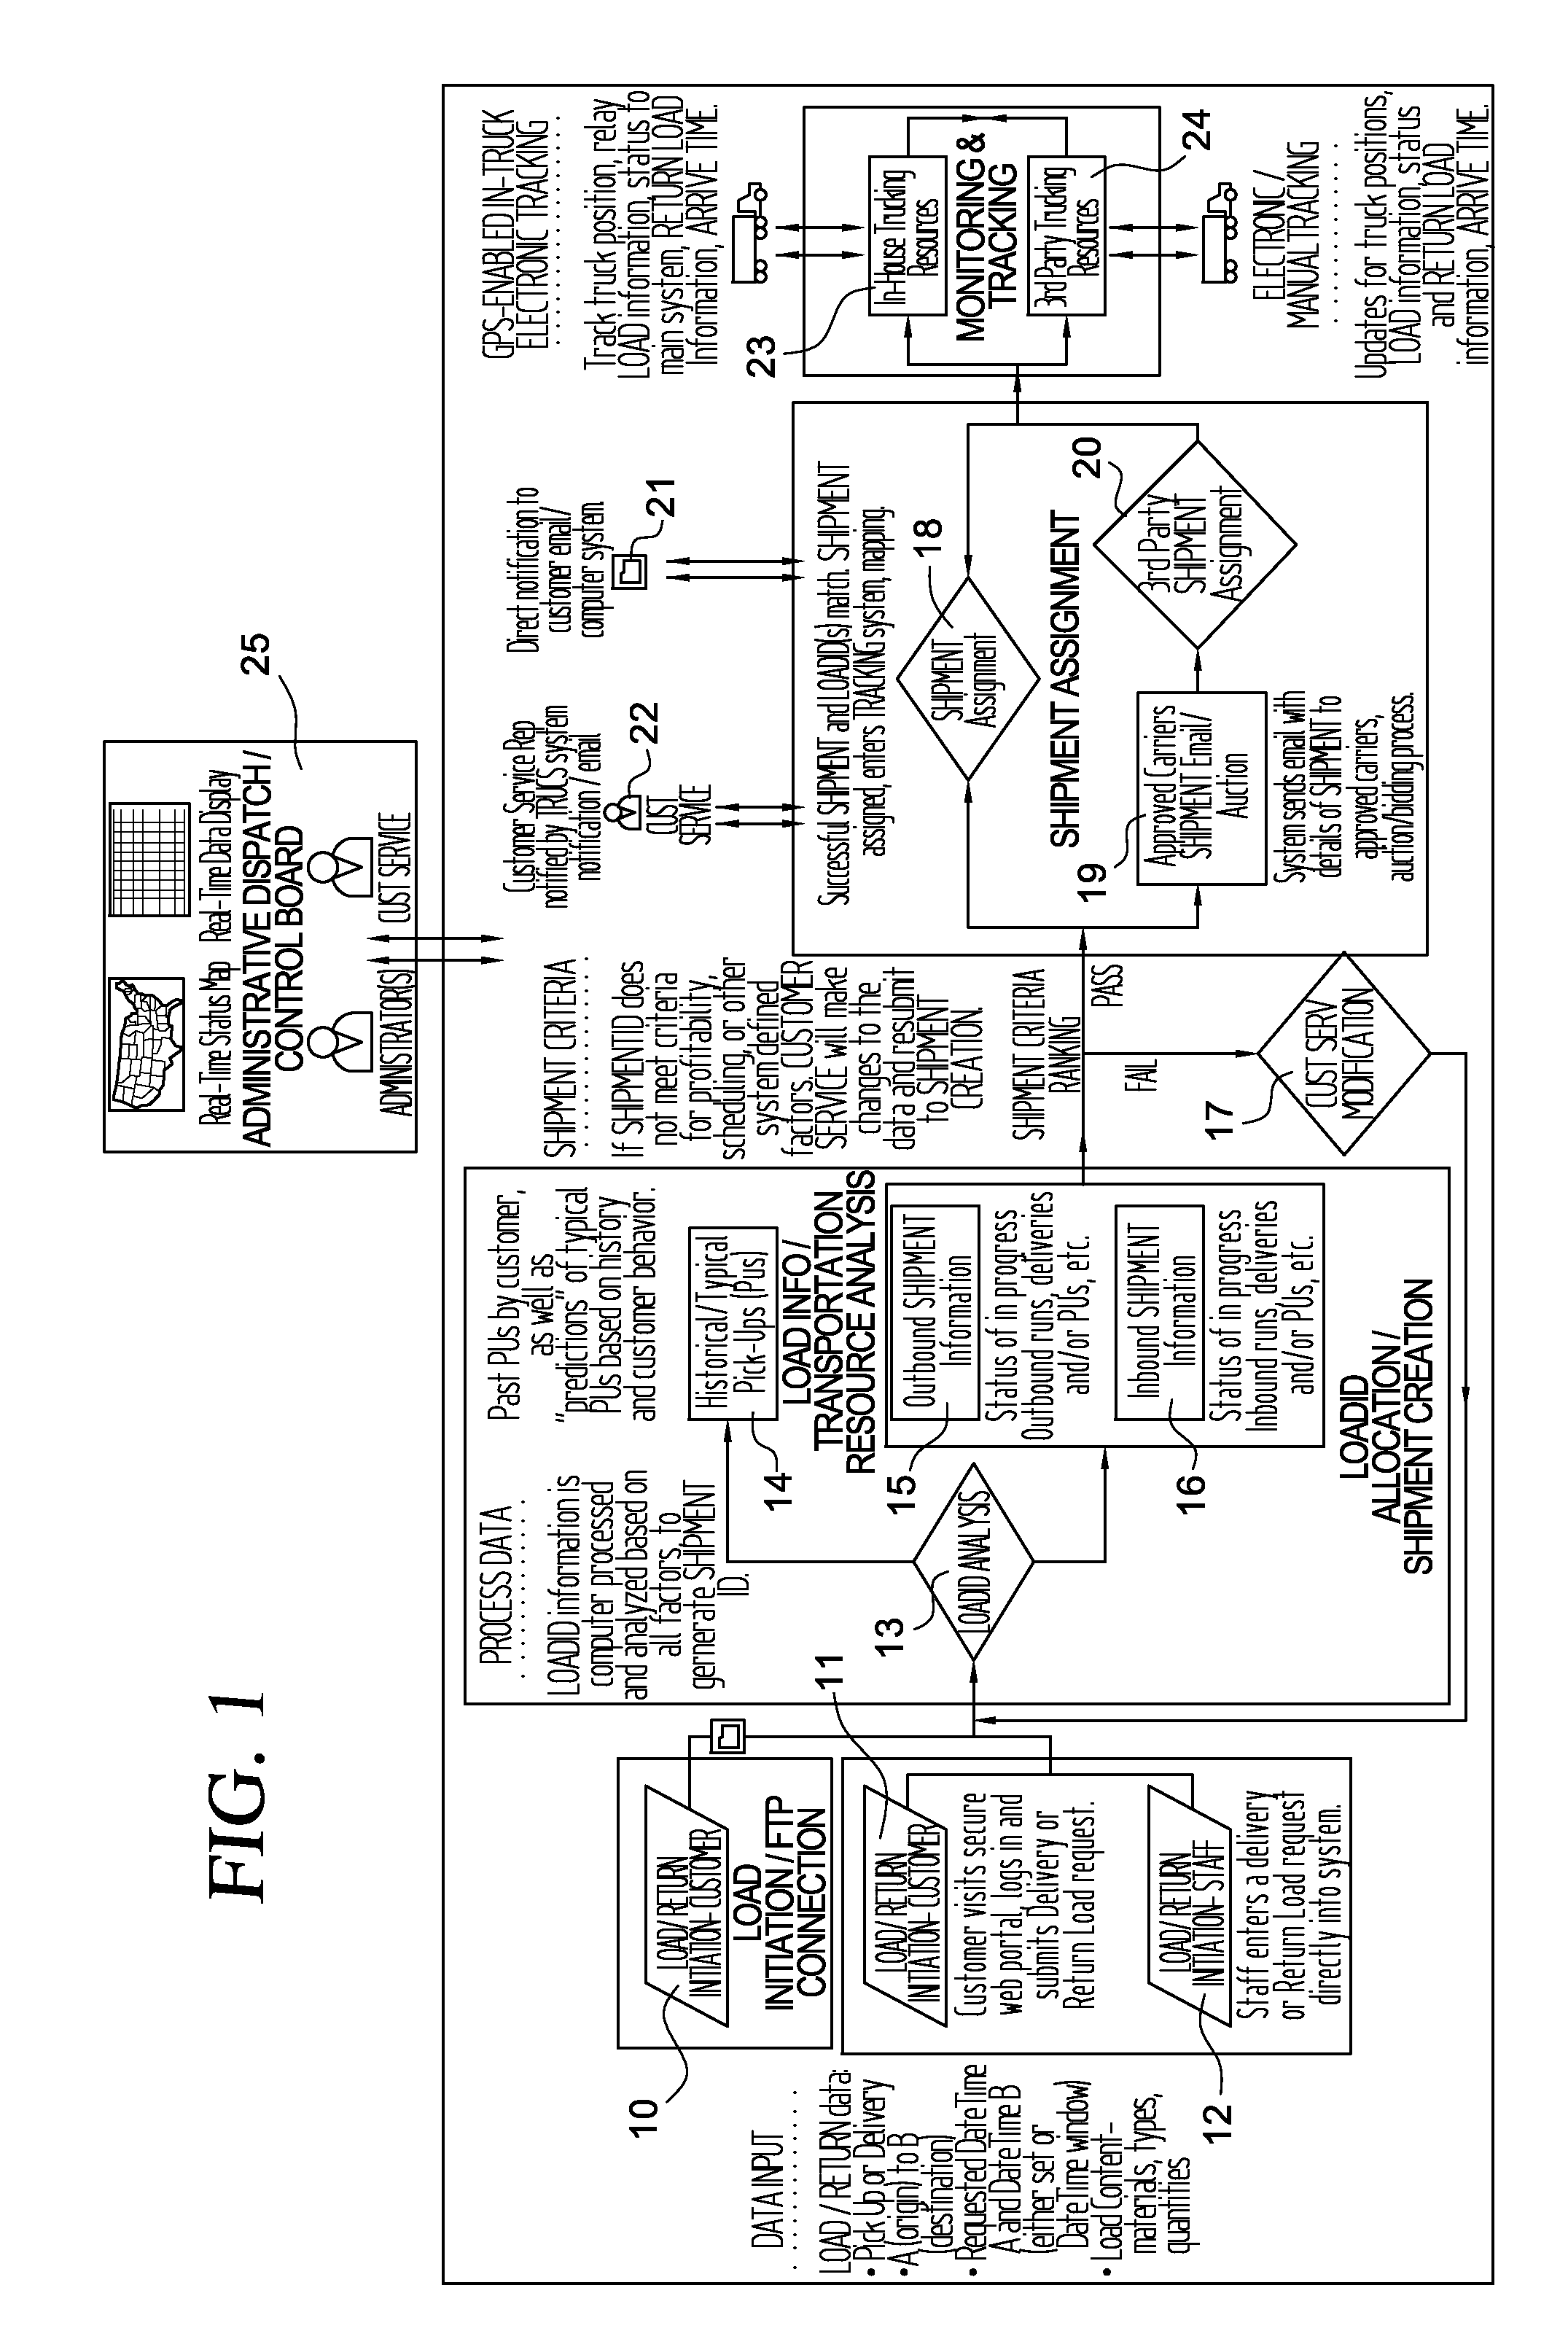 System and methods for transportation utilization and control